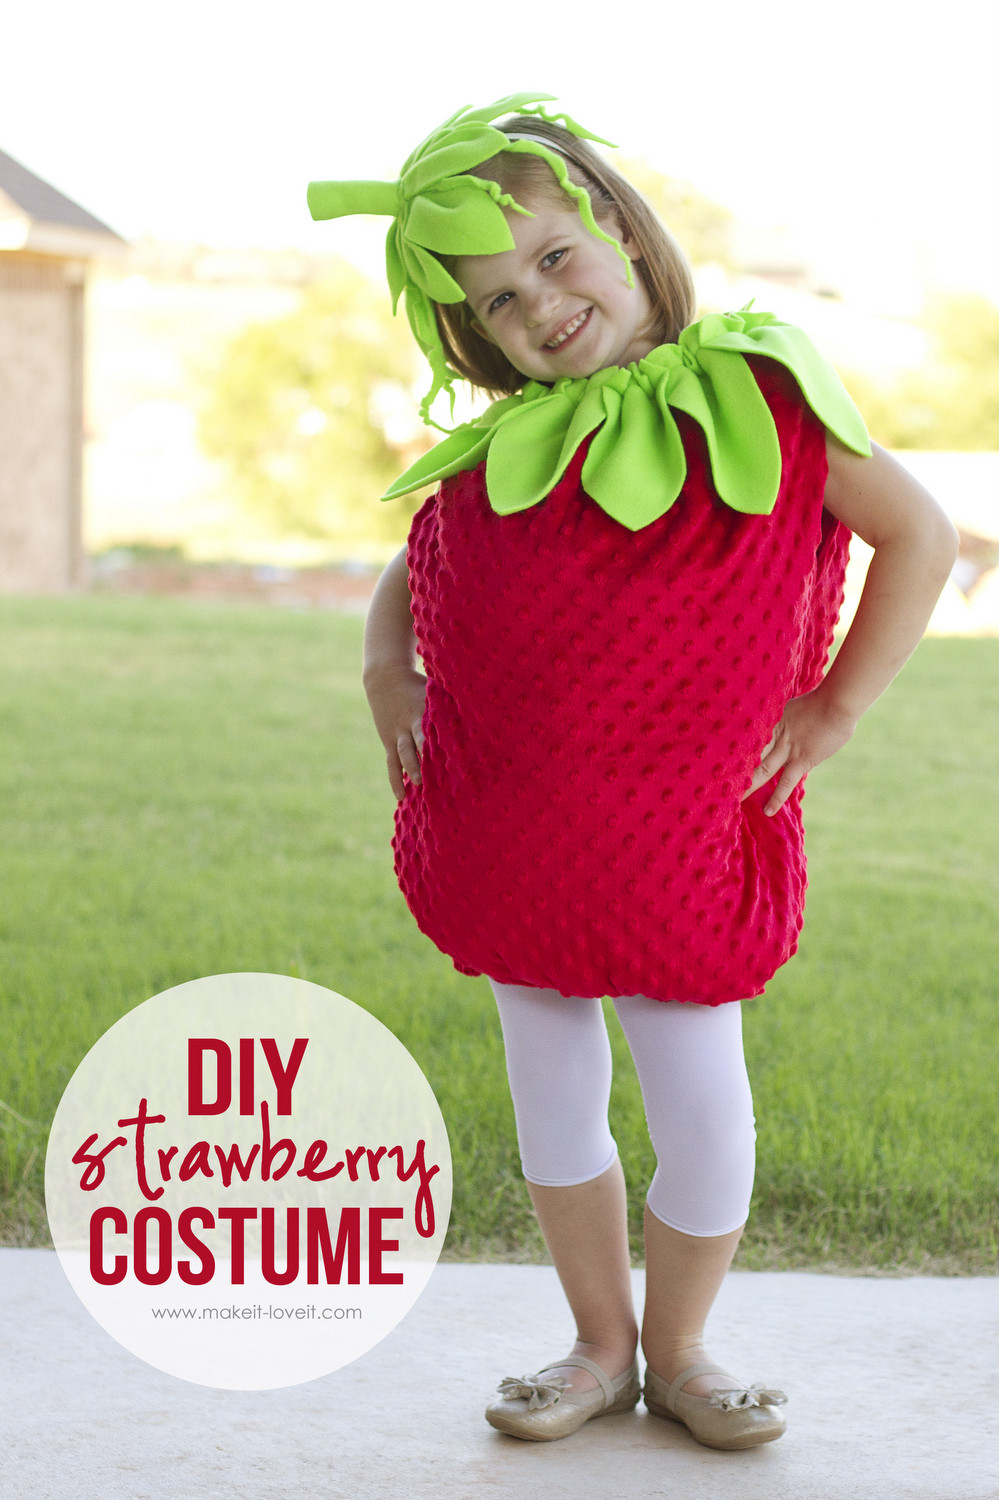 Strawberry Costume DIY
 Can you figure this out a few personal things